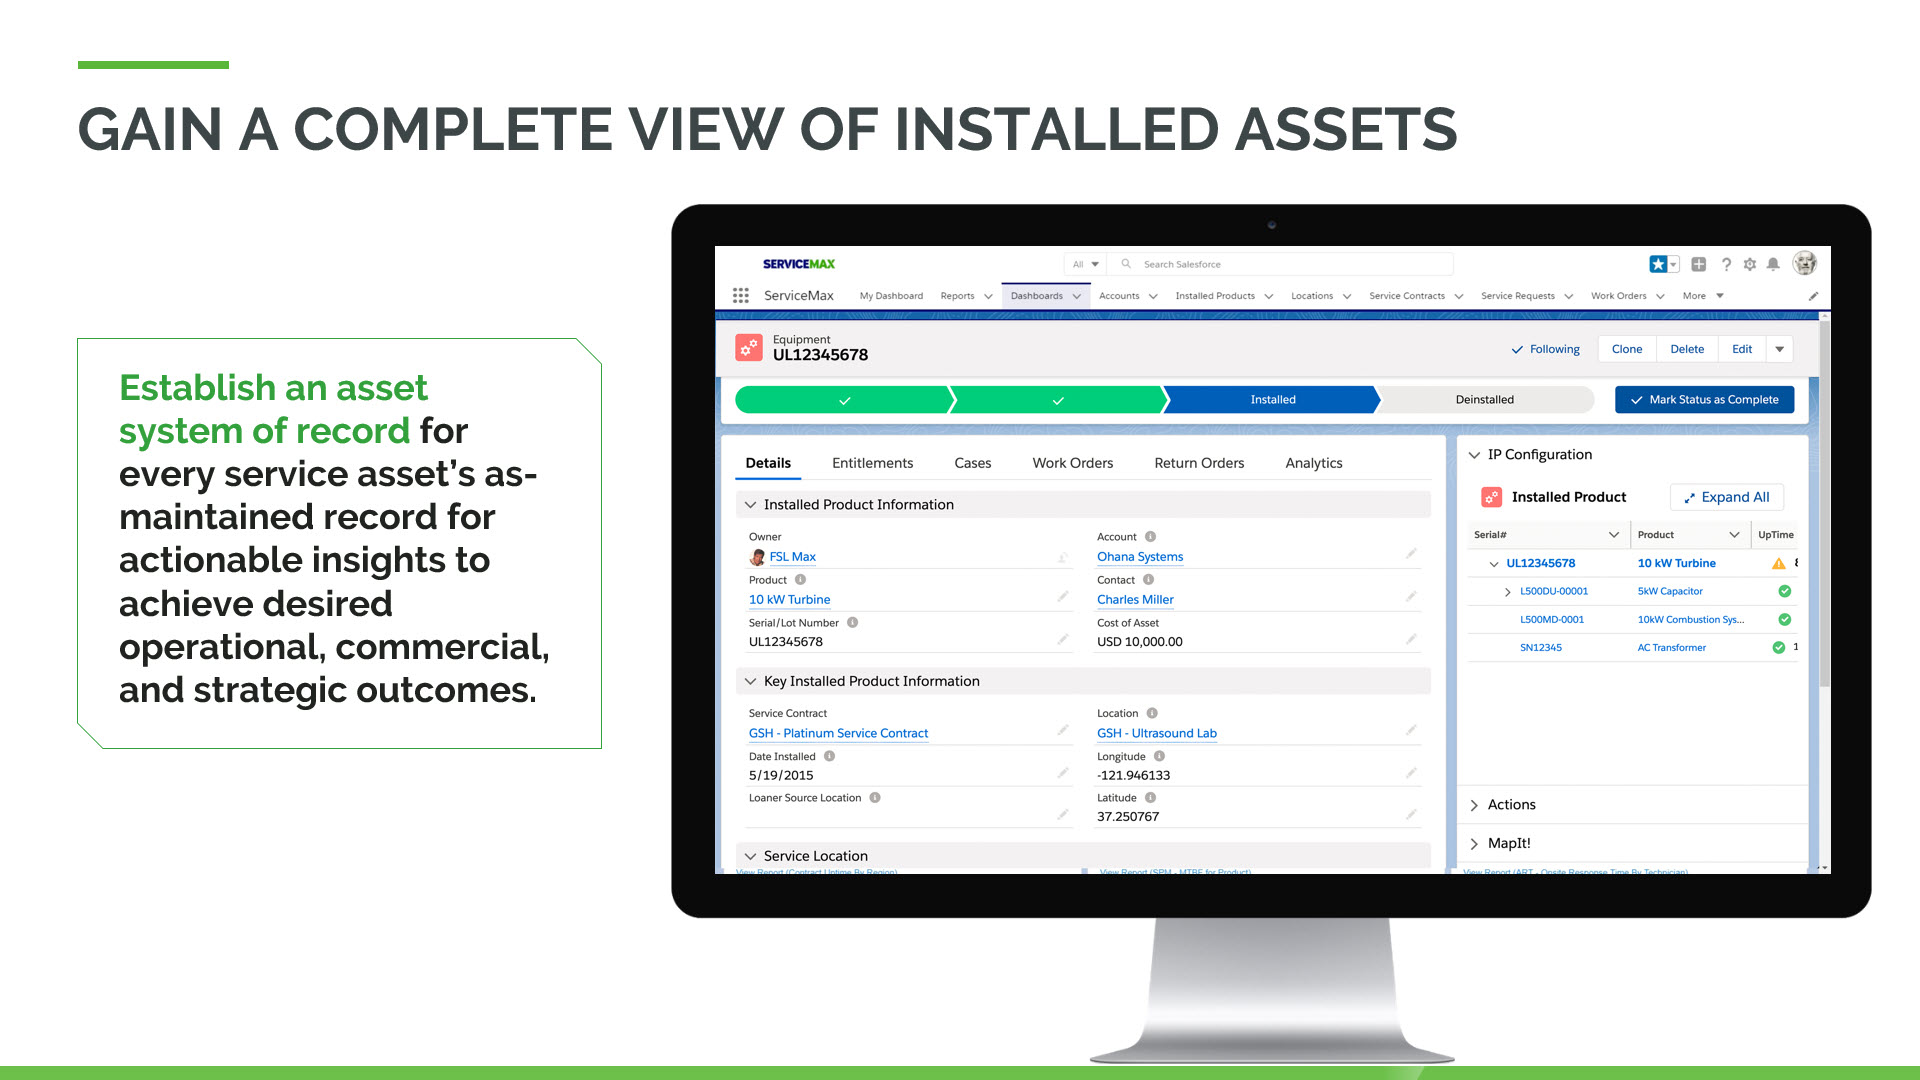 Establish an asset system of record to establish a single repository of every service asset’s as-maintained record for enterprise visibility and actionable insights to drive higher performance. 